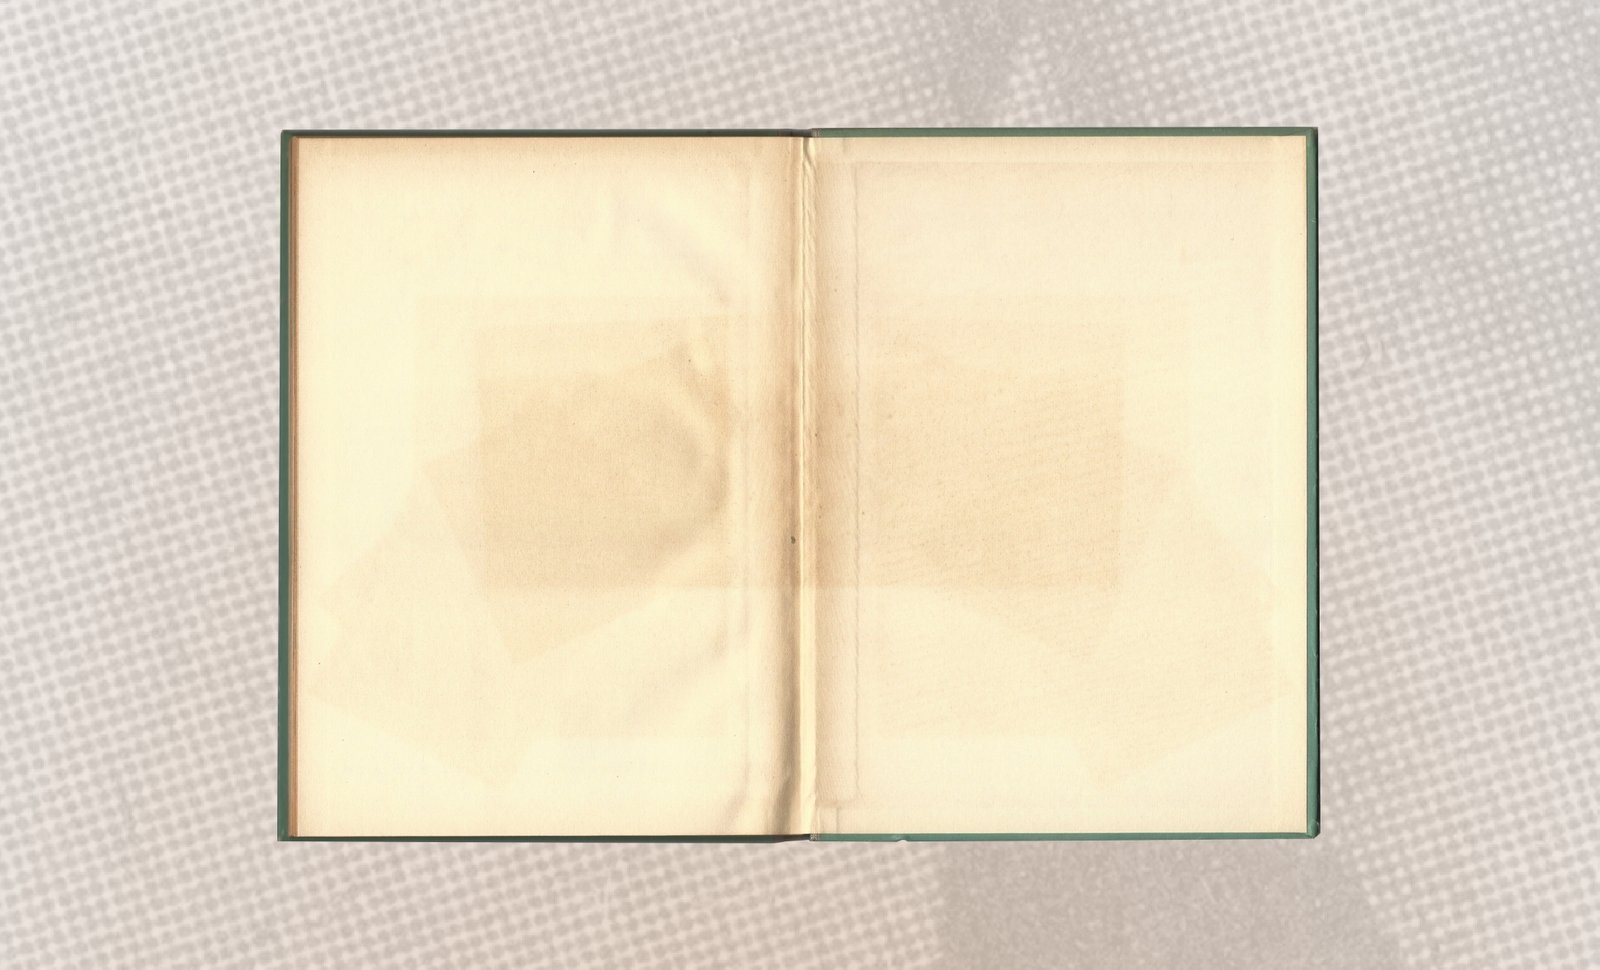 The Form of the Book - Book spread with shadows and empty pages